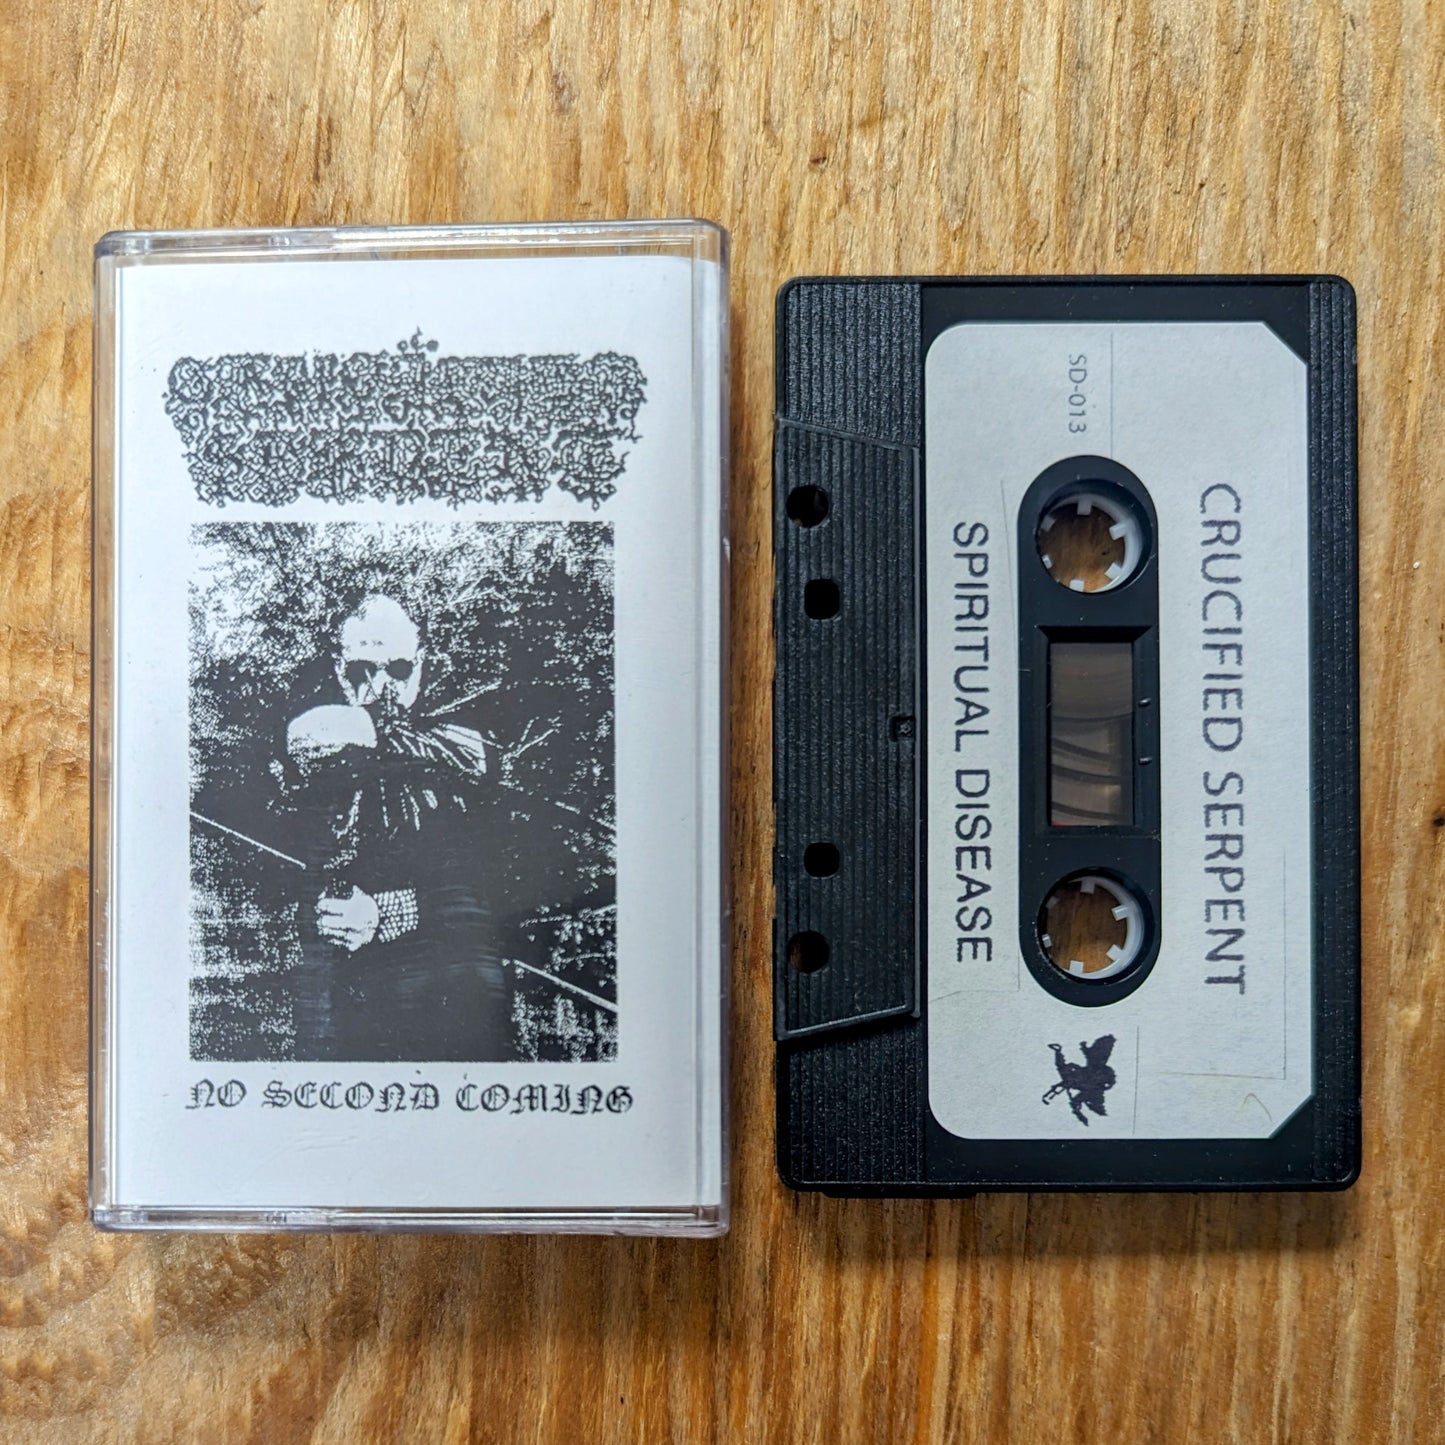 CRUCIFIED SERPENT "No Second Coming" Cassette Tape (lim.75)